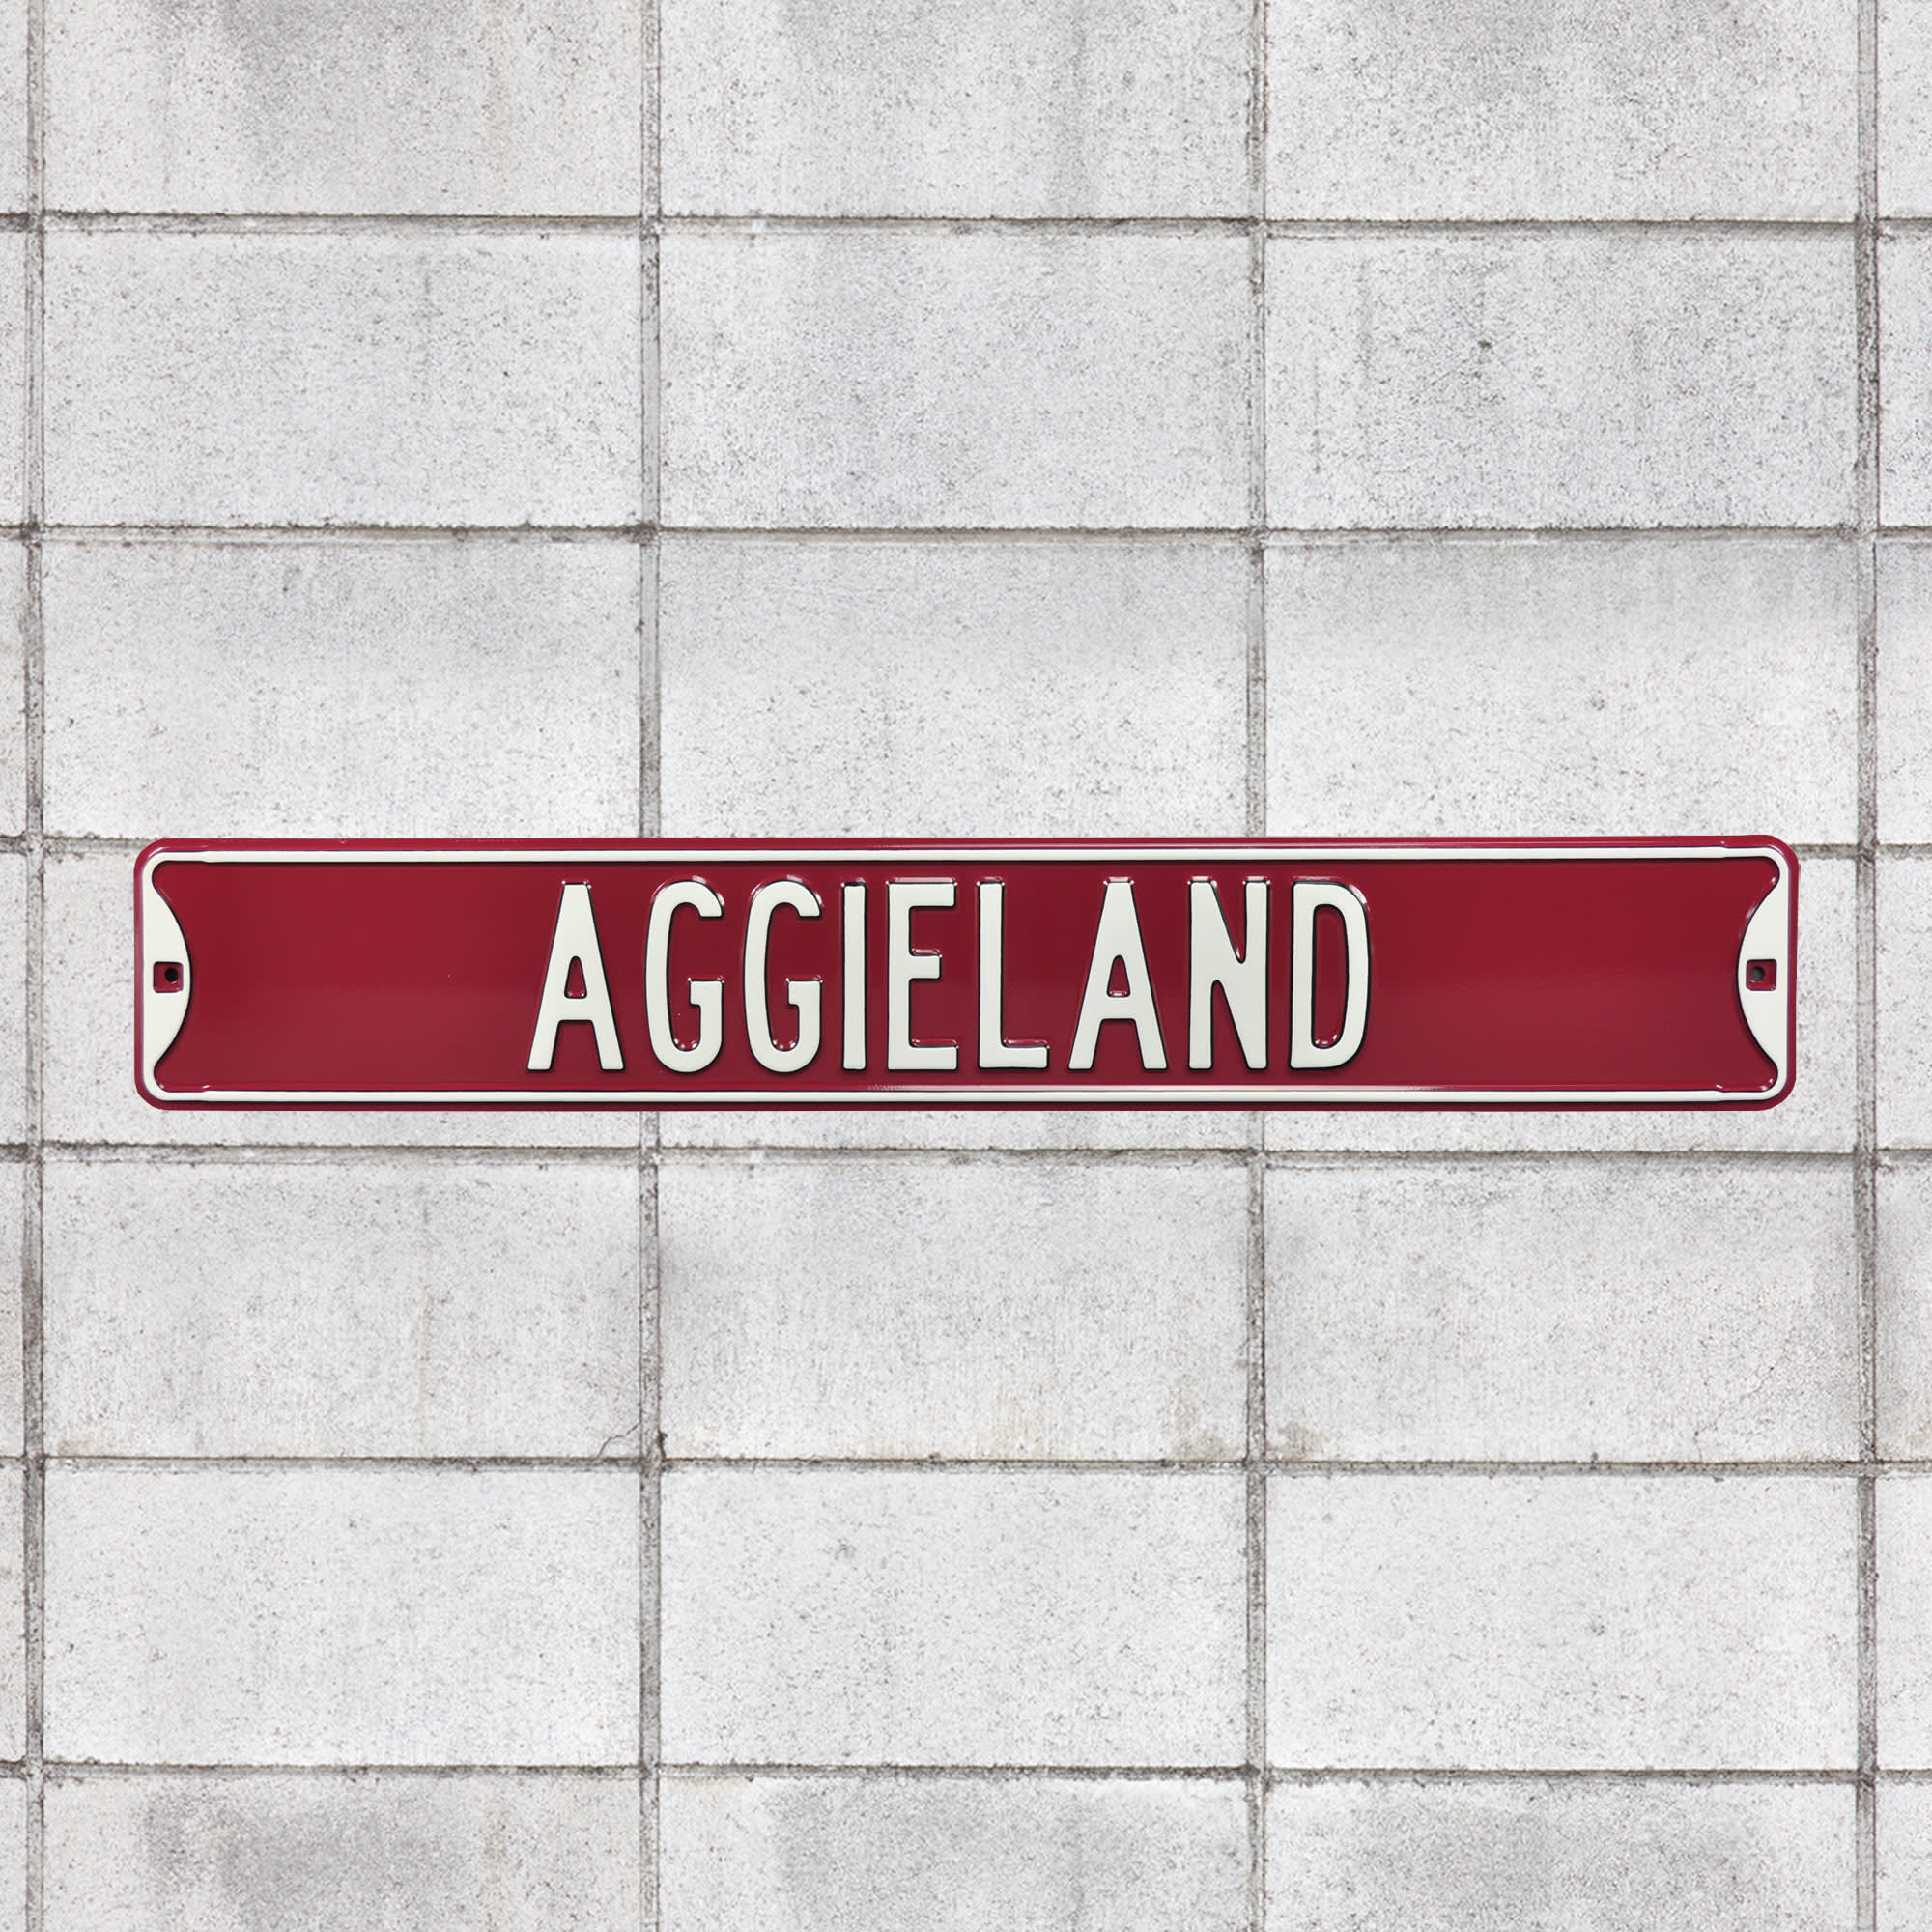 Texas A&M Aggies: Aggieland - Officially Licensed Metal Street Sign 36.0"W x 6.0"H by Fathead | 100% Steel